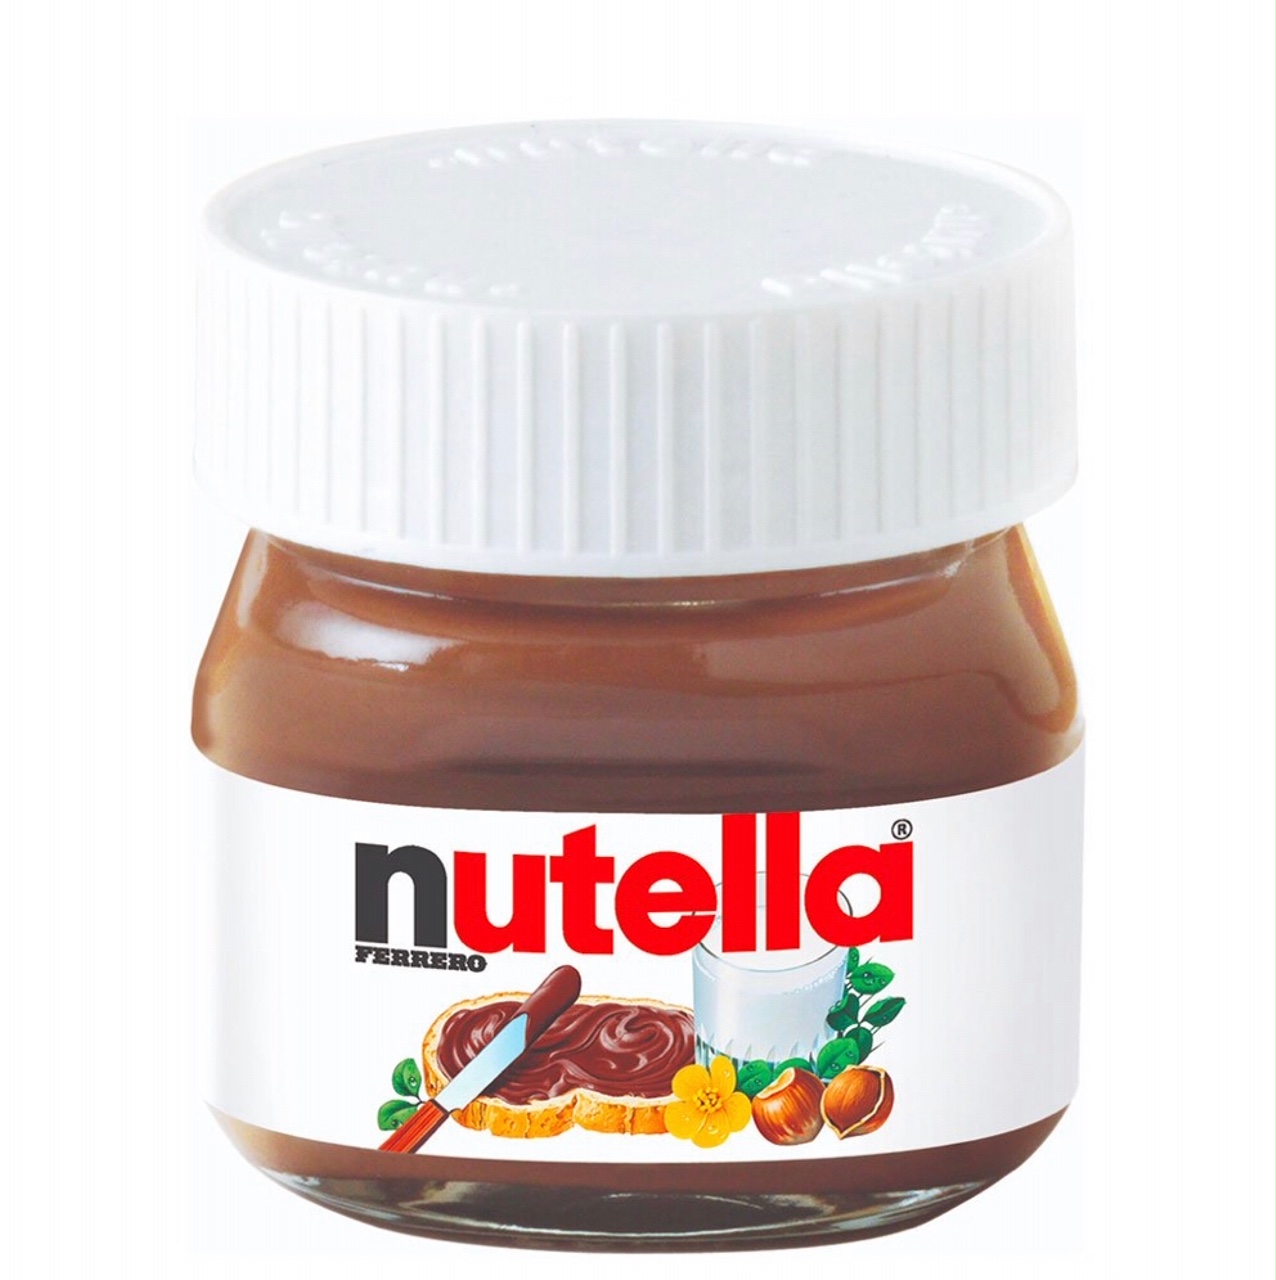 The Professors Online Lolly Shop - CALLING ALL NUTELLA LOVERS! Just in -  new mini Nutella 25g jars available now on our website! Use them as  favours, place on top of cakes